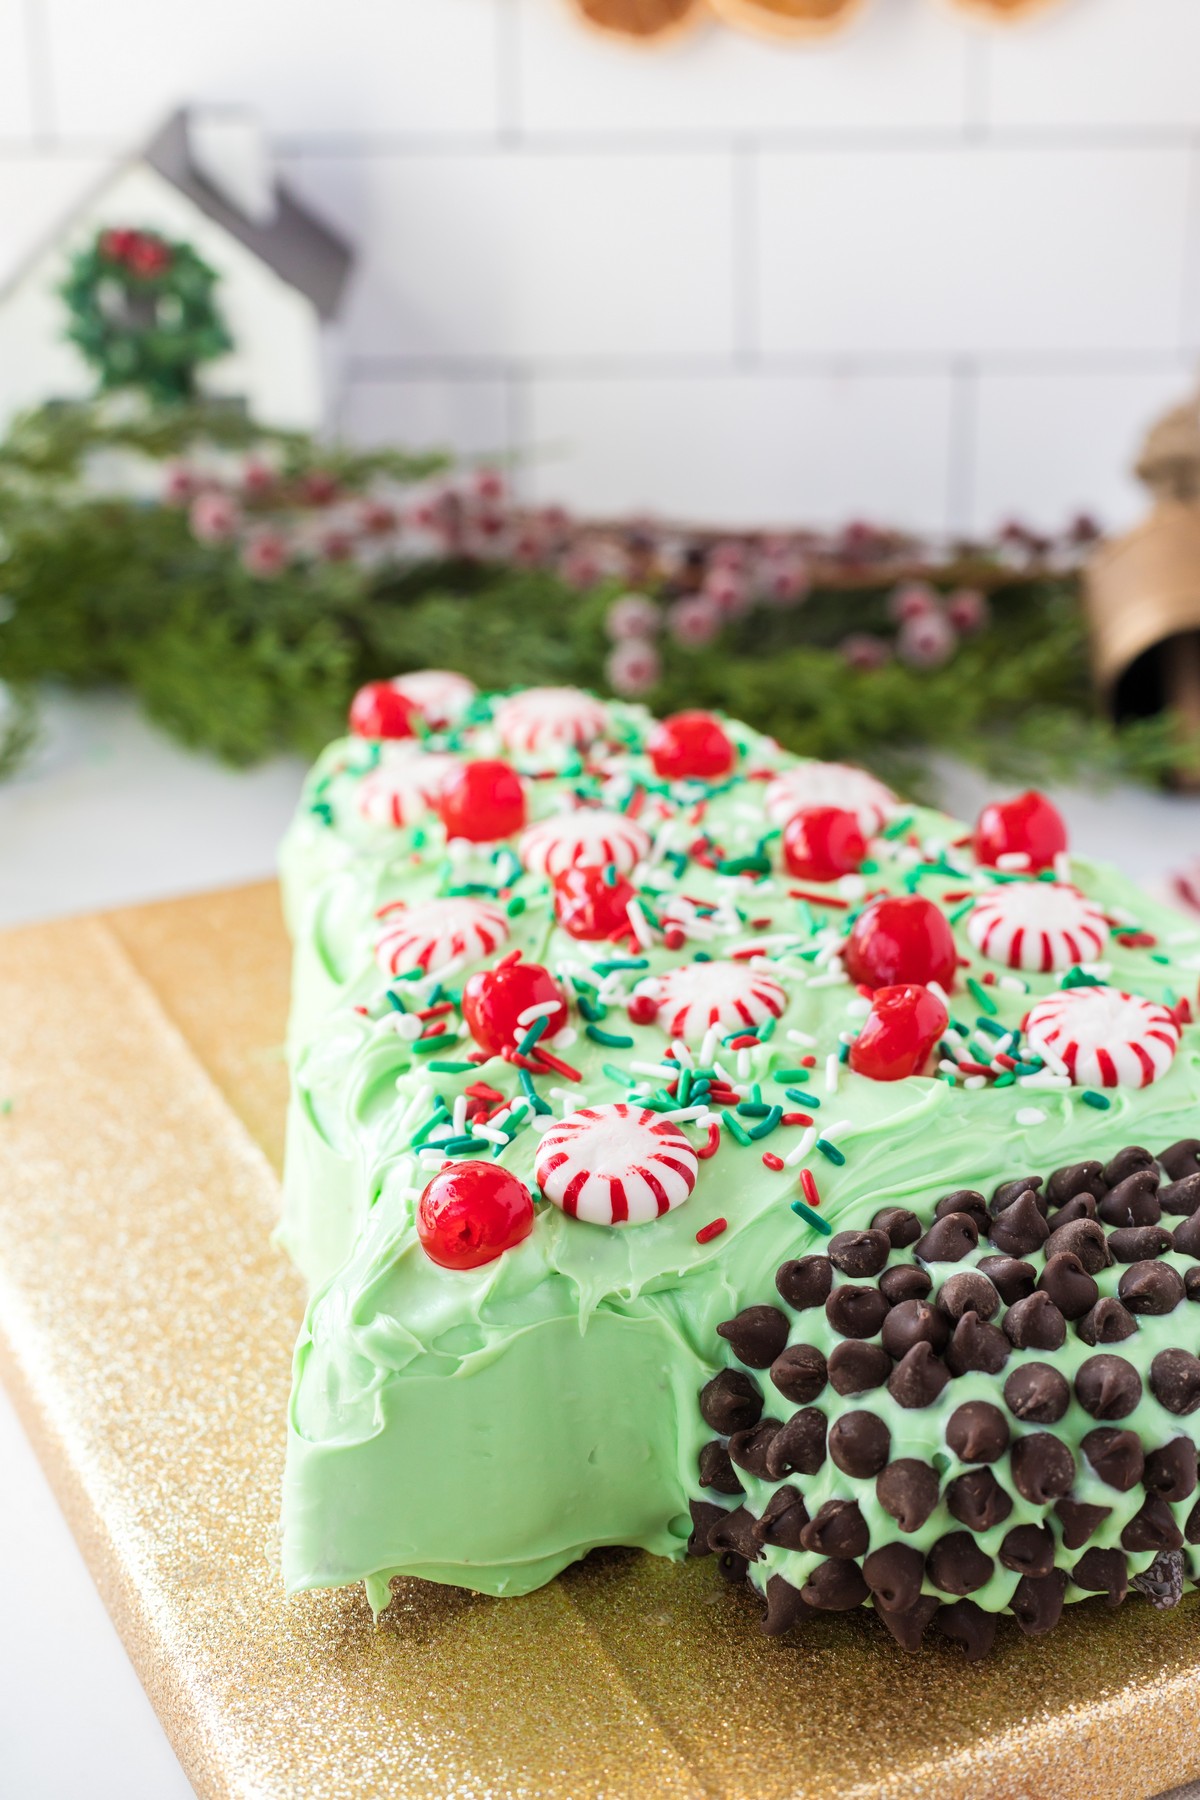 https://www.southerncravings.com/wp-content/uploads/2022/10/Christmas-Tree-Cake-20.jpg